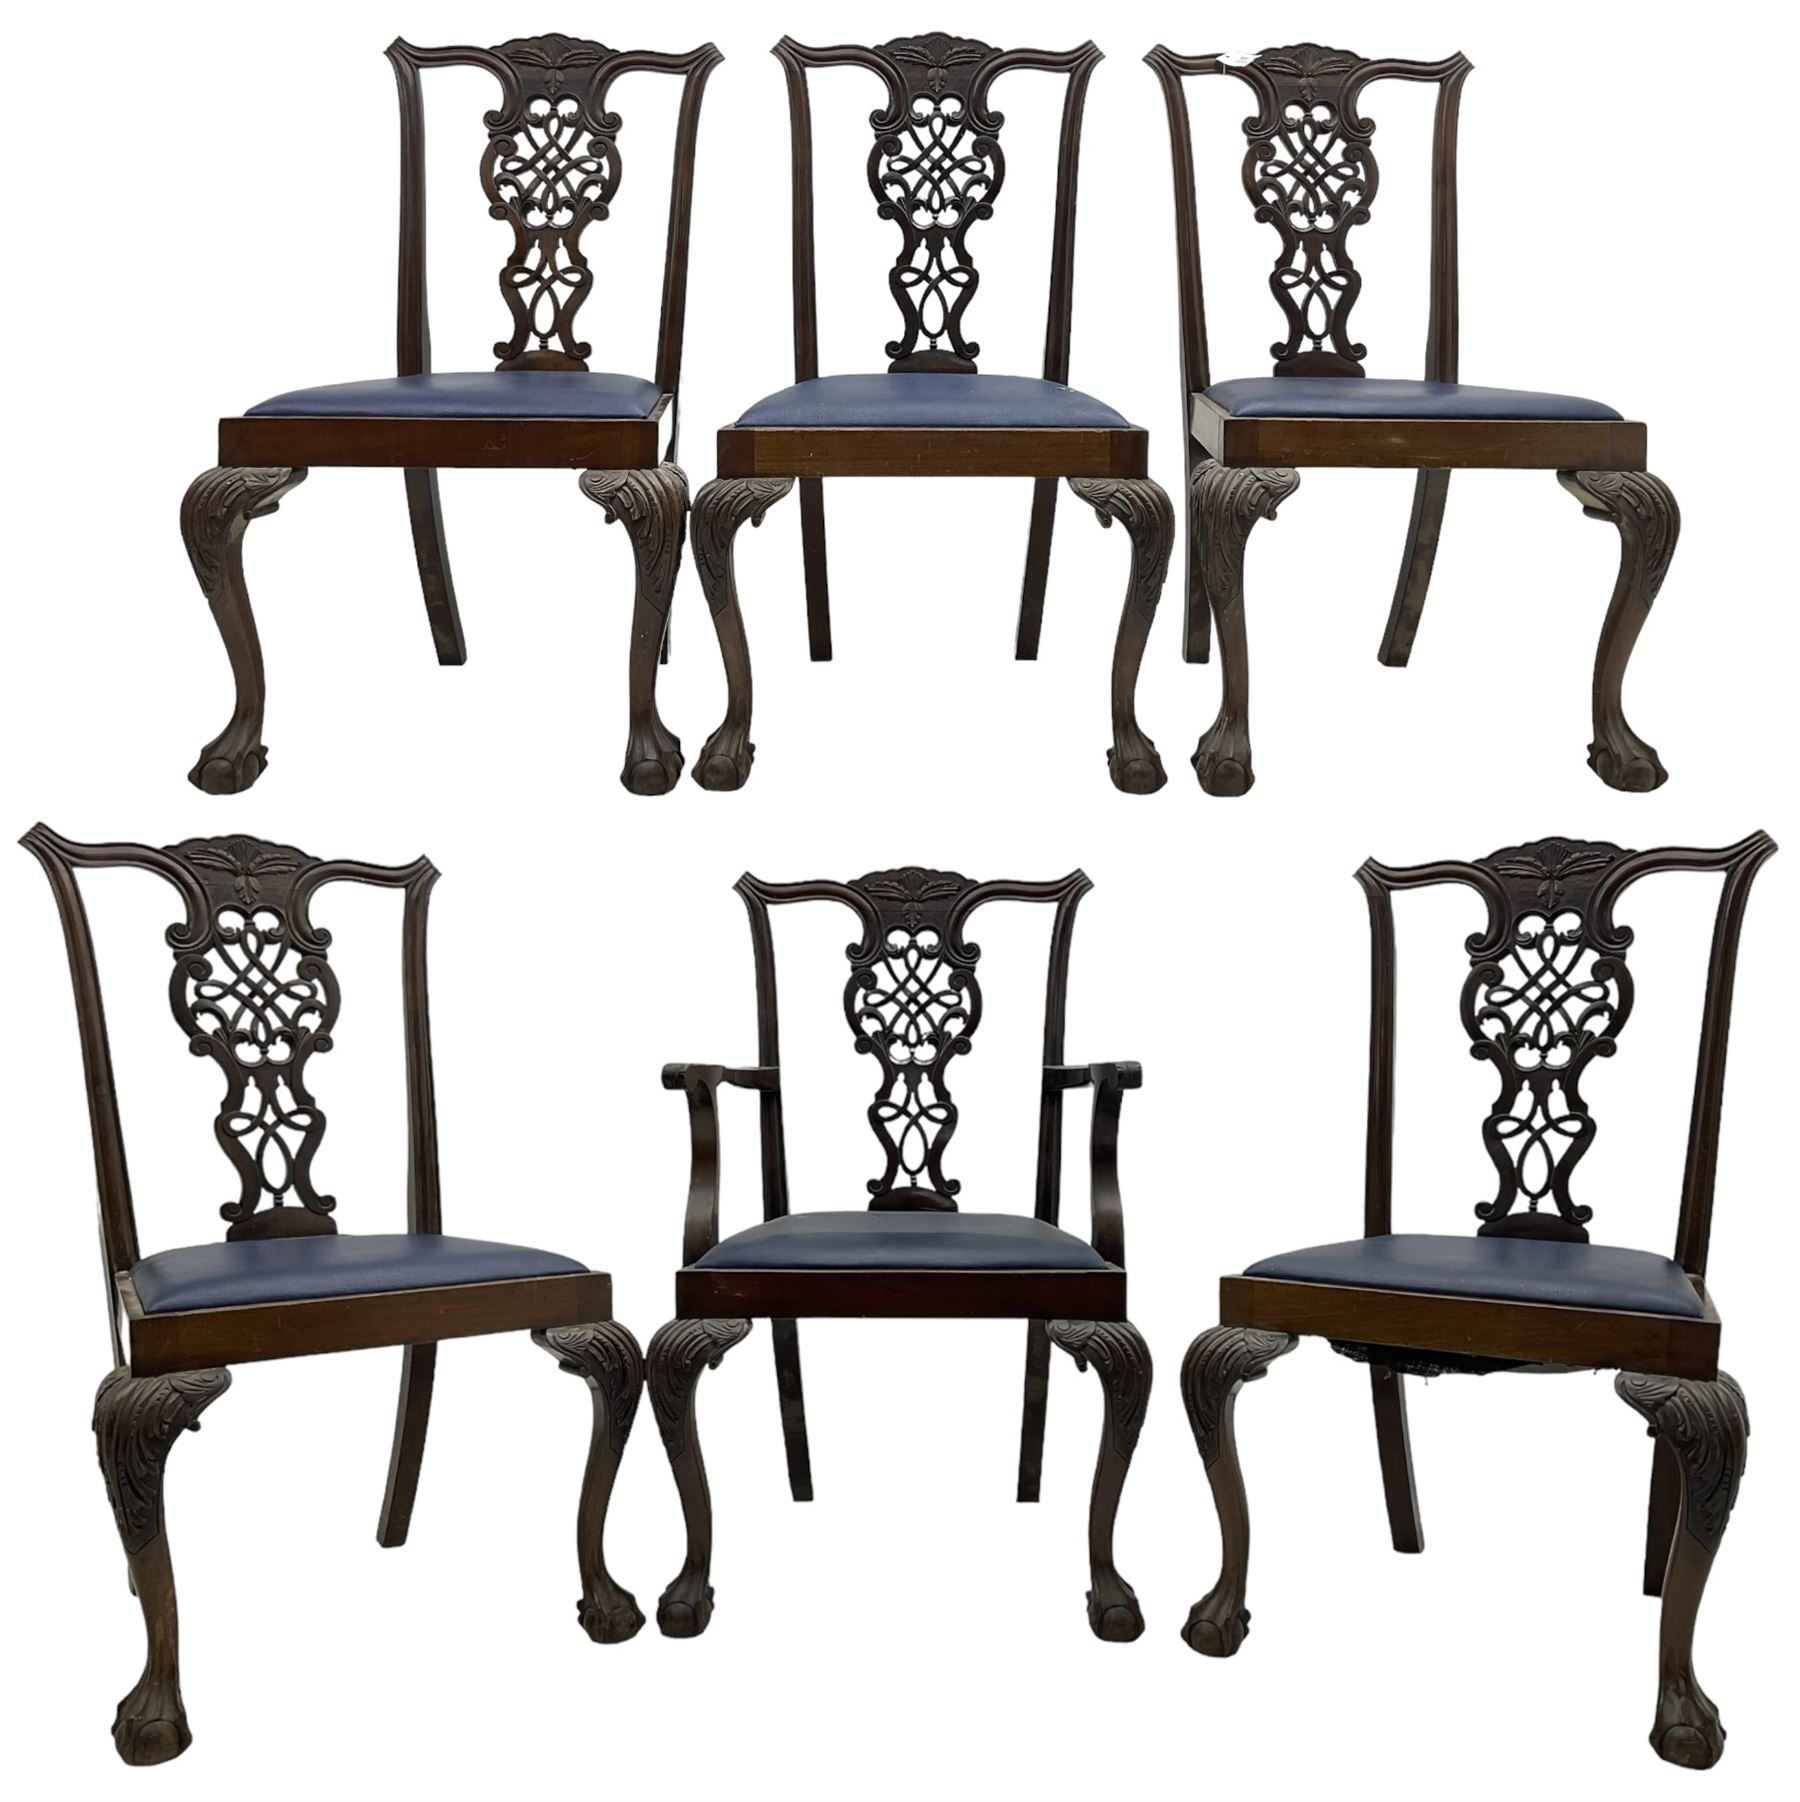 Set of six (5+1) Chippendale design mahogany dining chairs